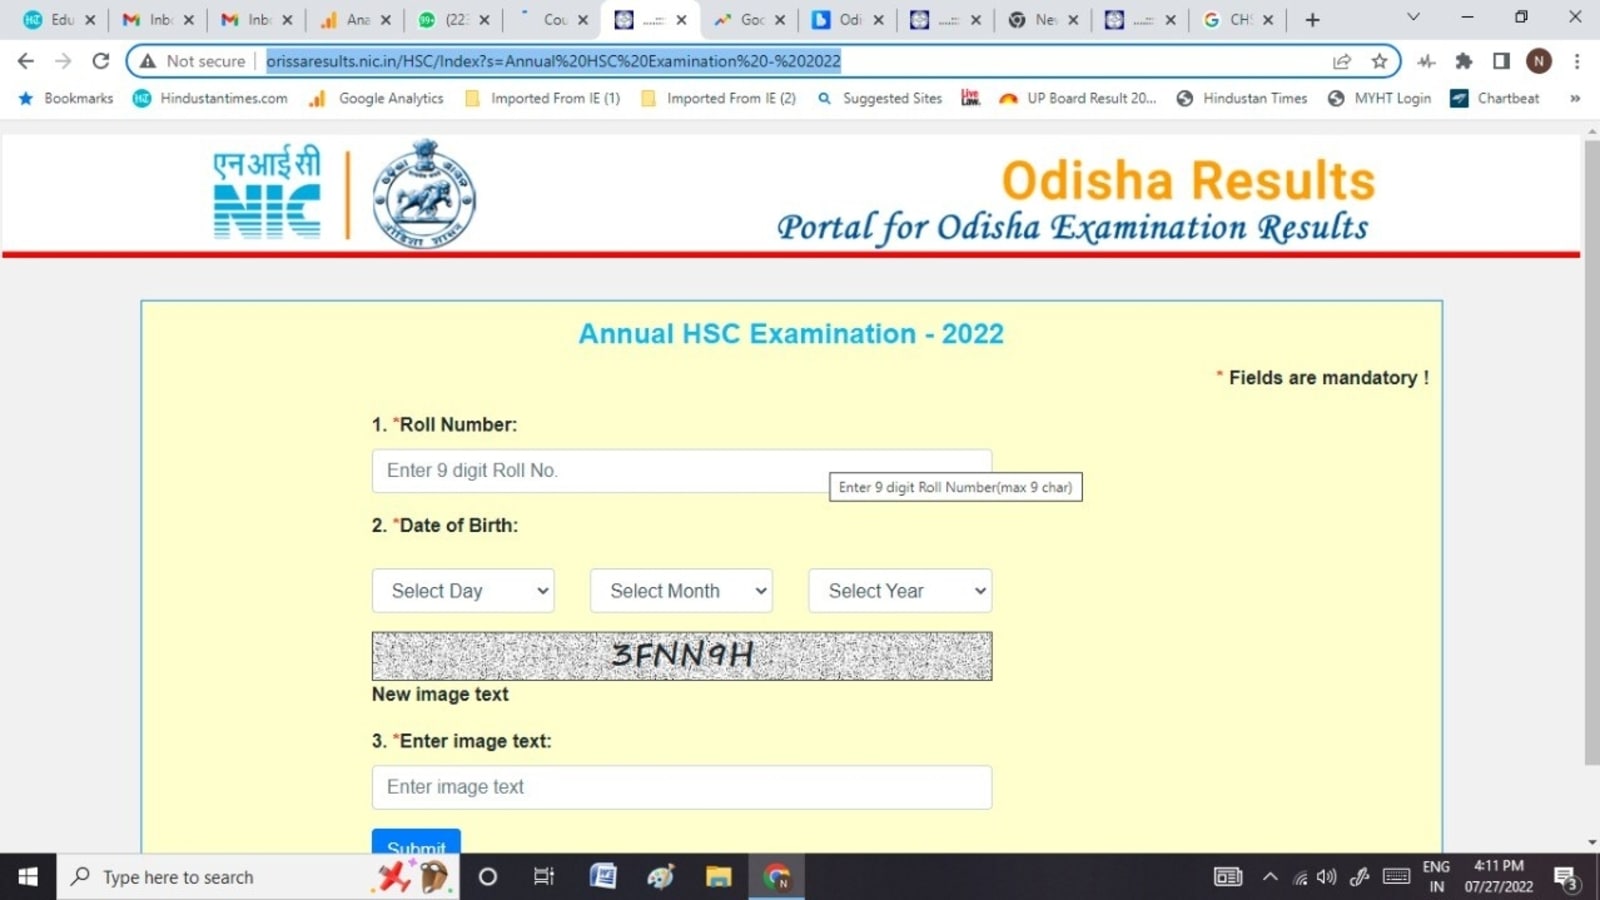 Odisha CHSE Result 2022: Odisha board 12th Science, Commerce results out, link